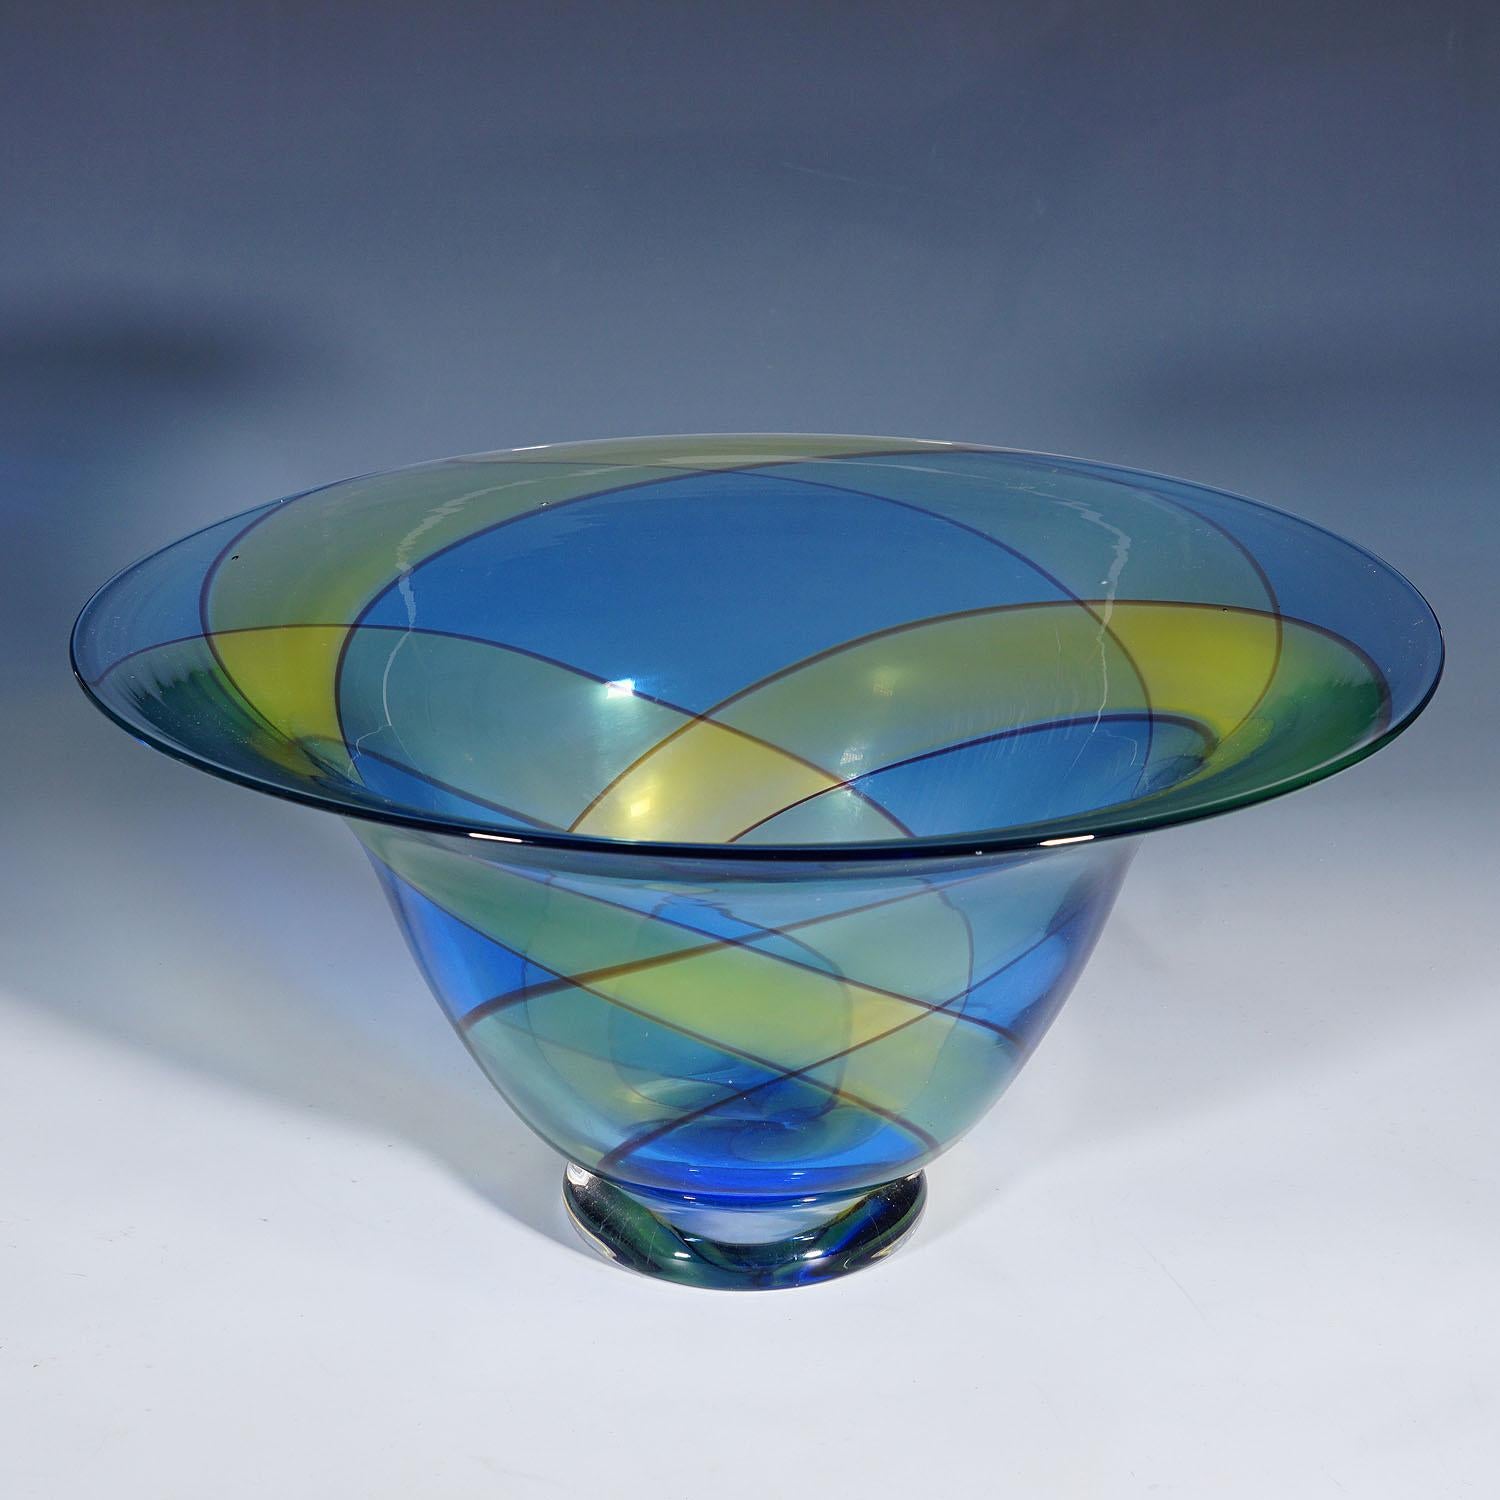 Large Carnevale Art Glass Bowl by Vetreria Archimede Seguso ca. 1980s

A very large vintage art glass bowl of the Carnevale series introduced by Archimede Seguso and manufactured by Vetreria Archimede Seguso in the late 1980s. Clear glass with